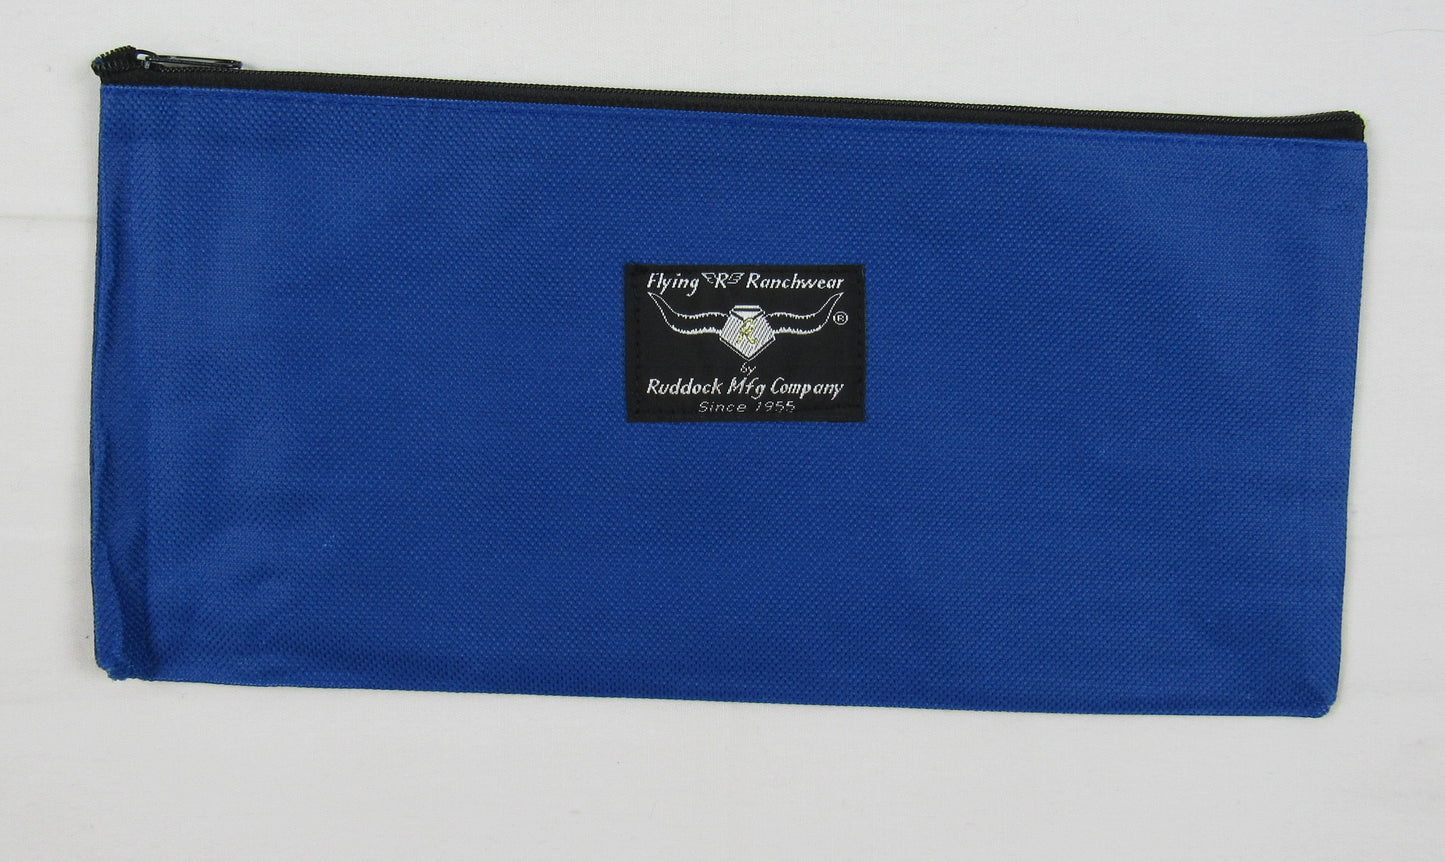 zippered gear bag in royal blue color